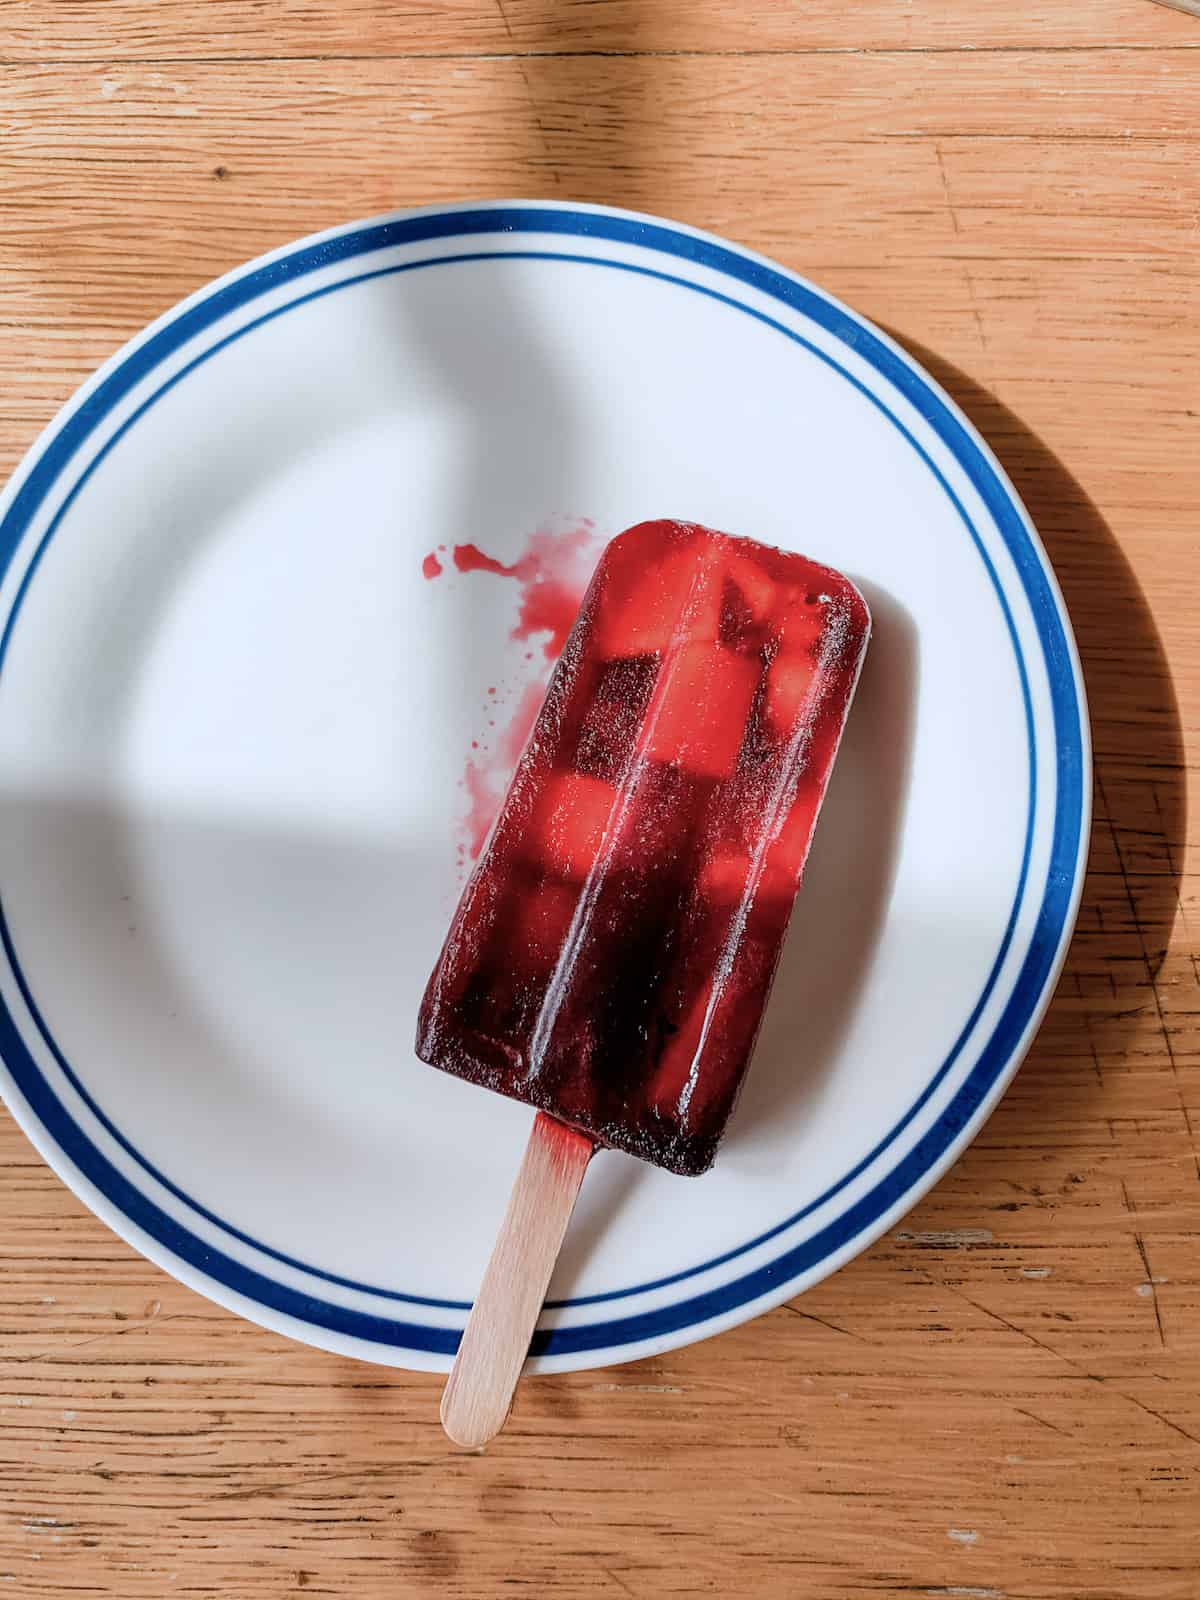 Red popsicle with pieces of mango sitting on a white and blue plate.